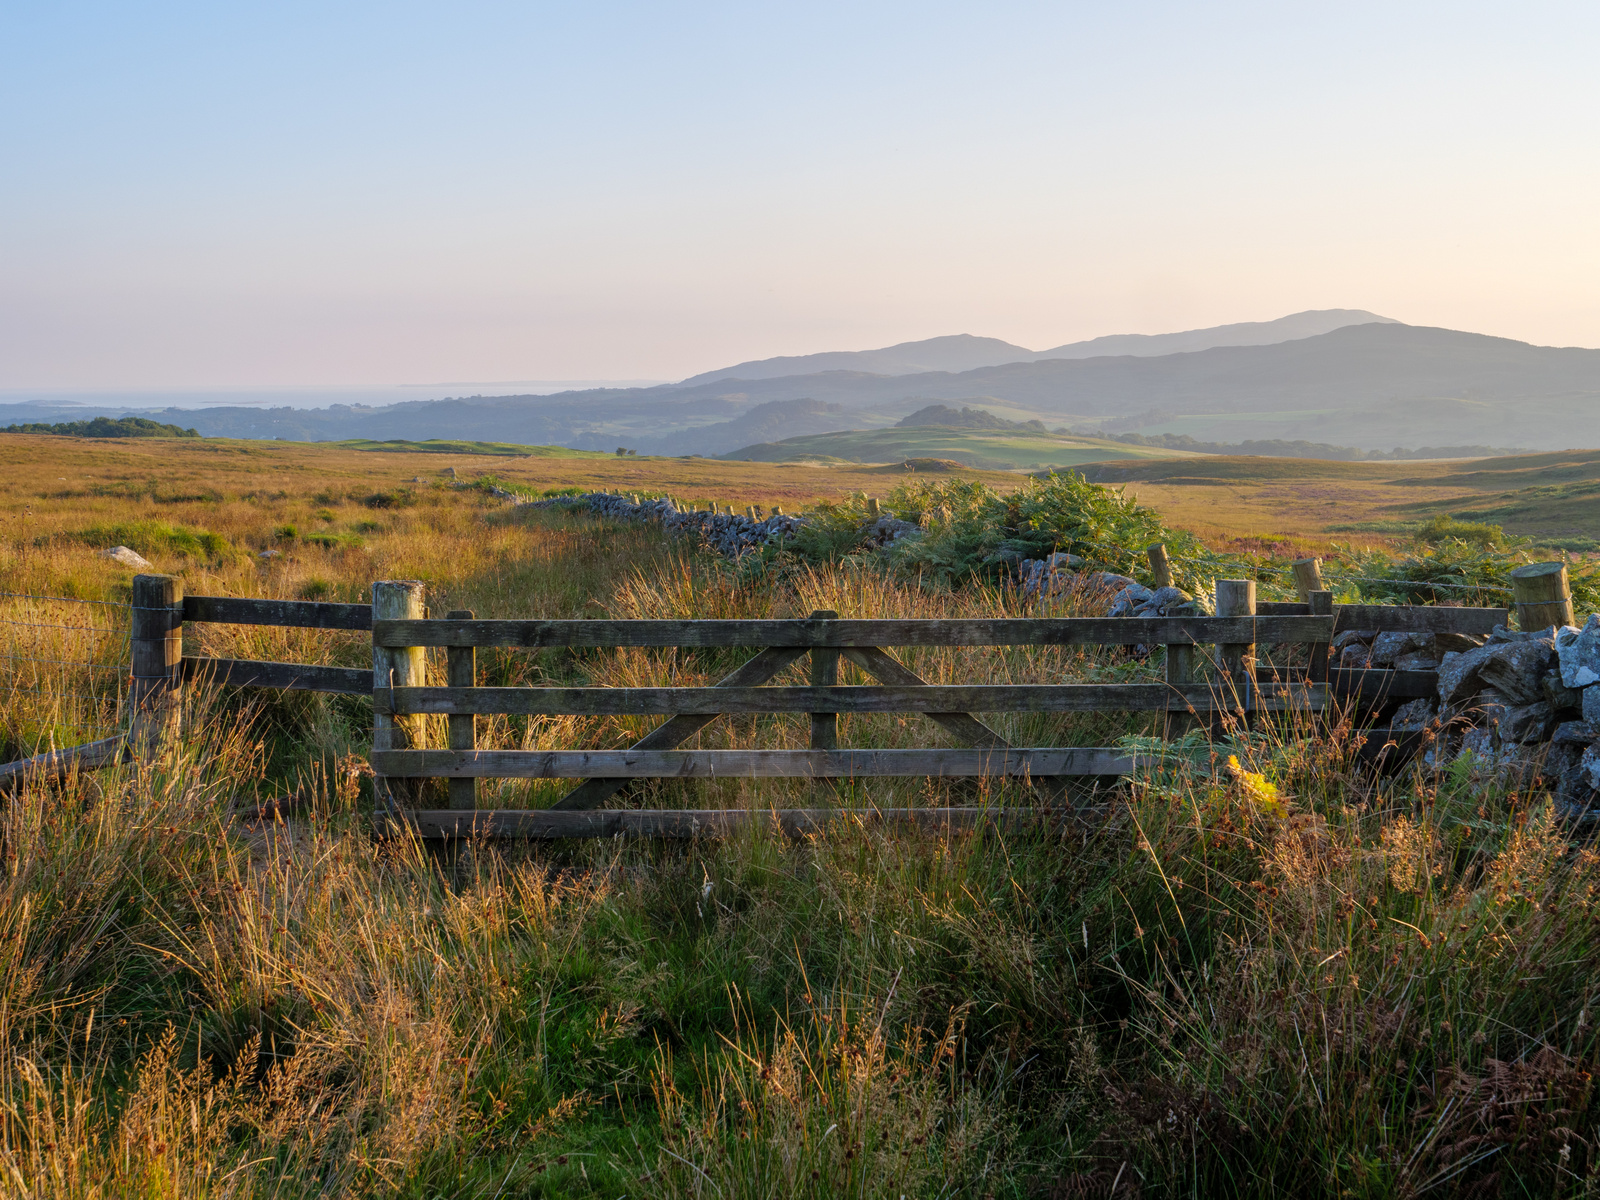 A traditional gate stands proudly amidst the breathtaking Scottish landscape, its weathered wooden frame a timeless symbol of entry into the majestic wilderness beyond, where rolling hills, lush greenery, and rugged beauty await exploration and discovery